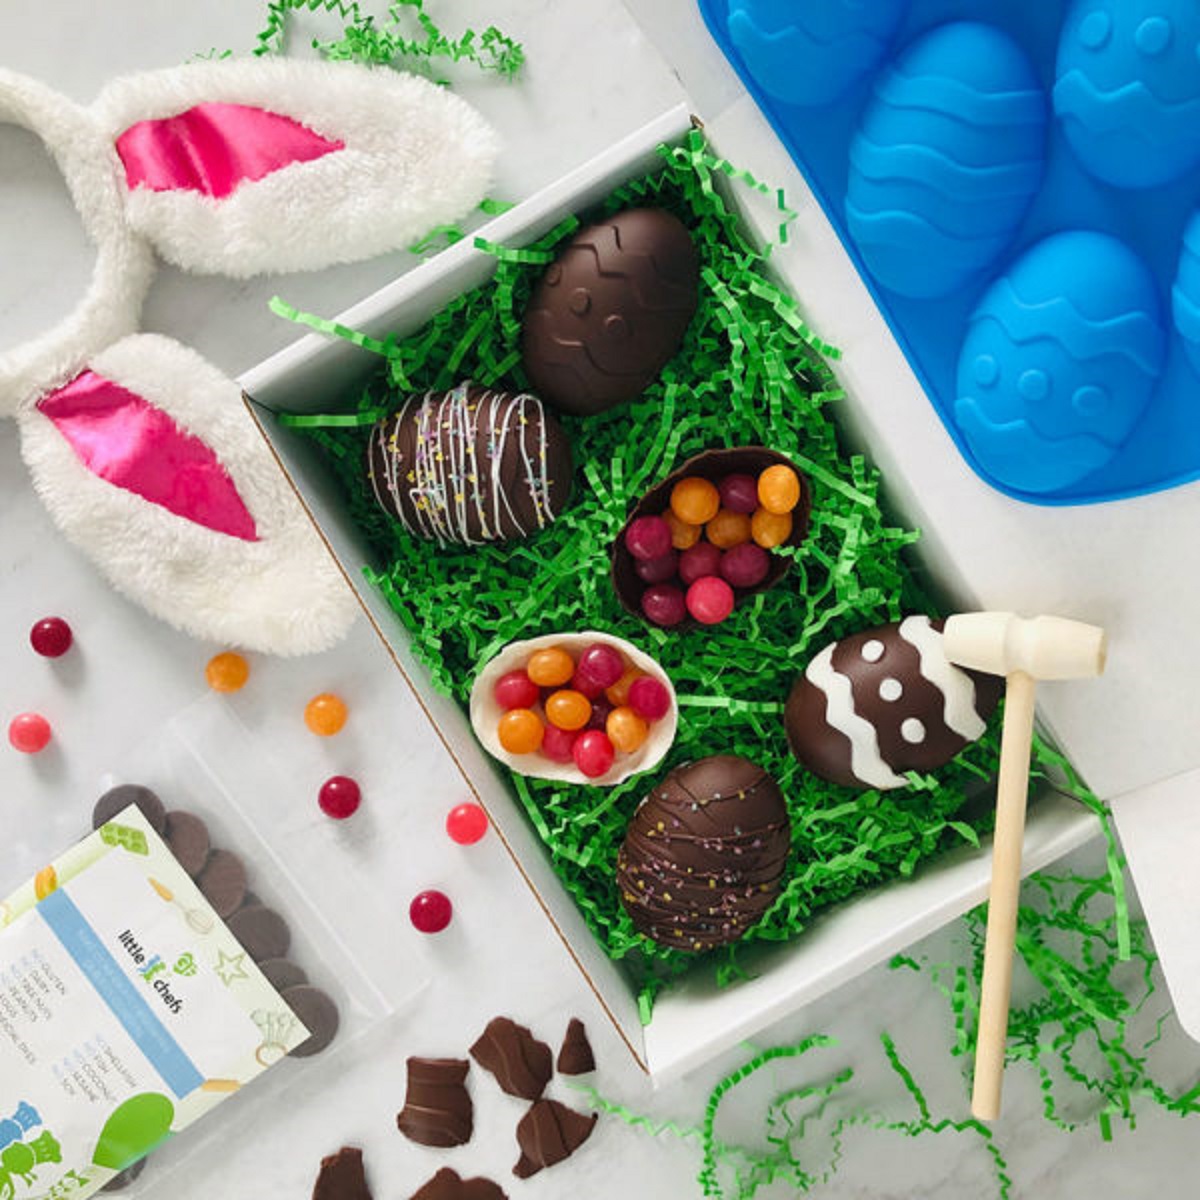 31 Best Easter Toys & Easter Basket Gifts For Kids This Spring